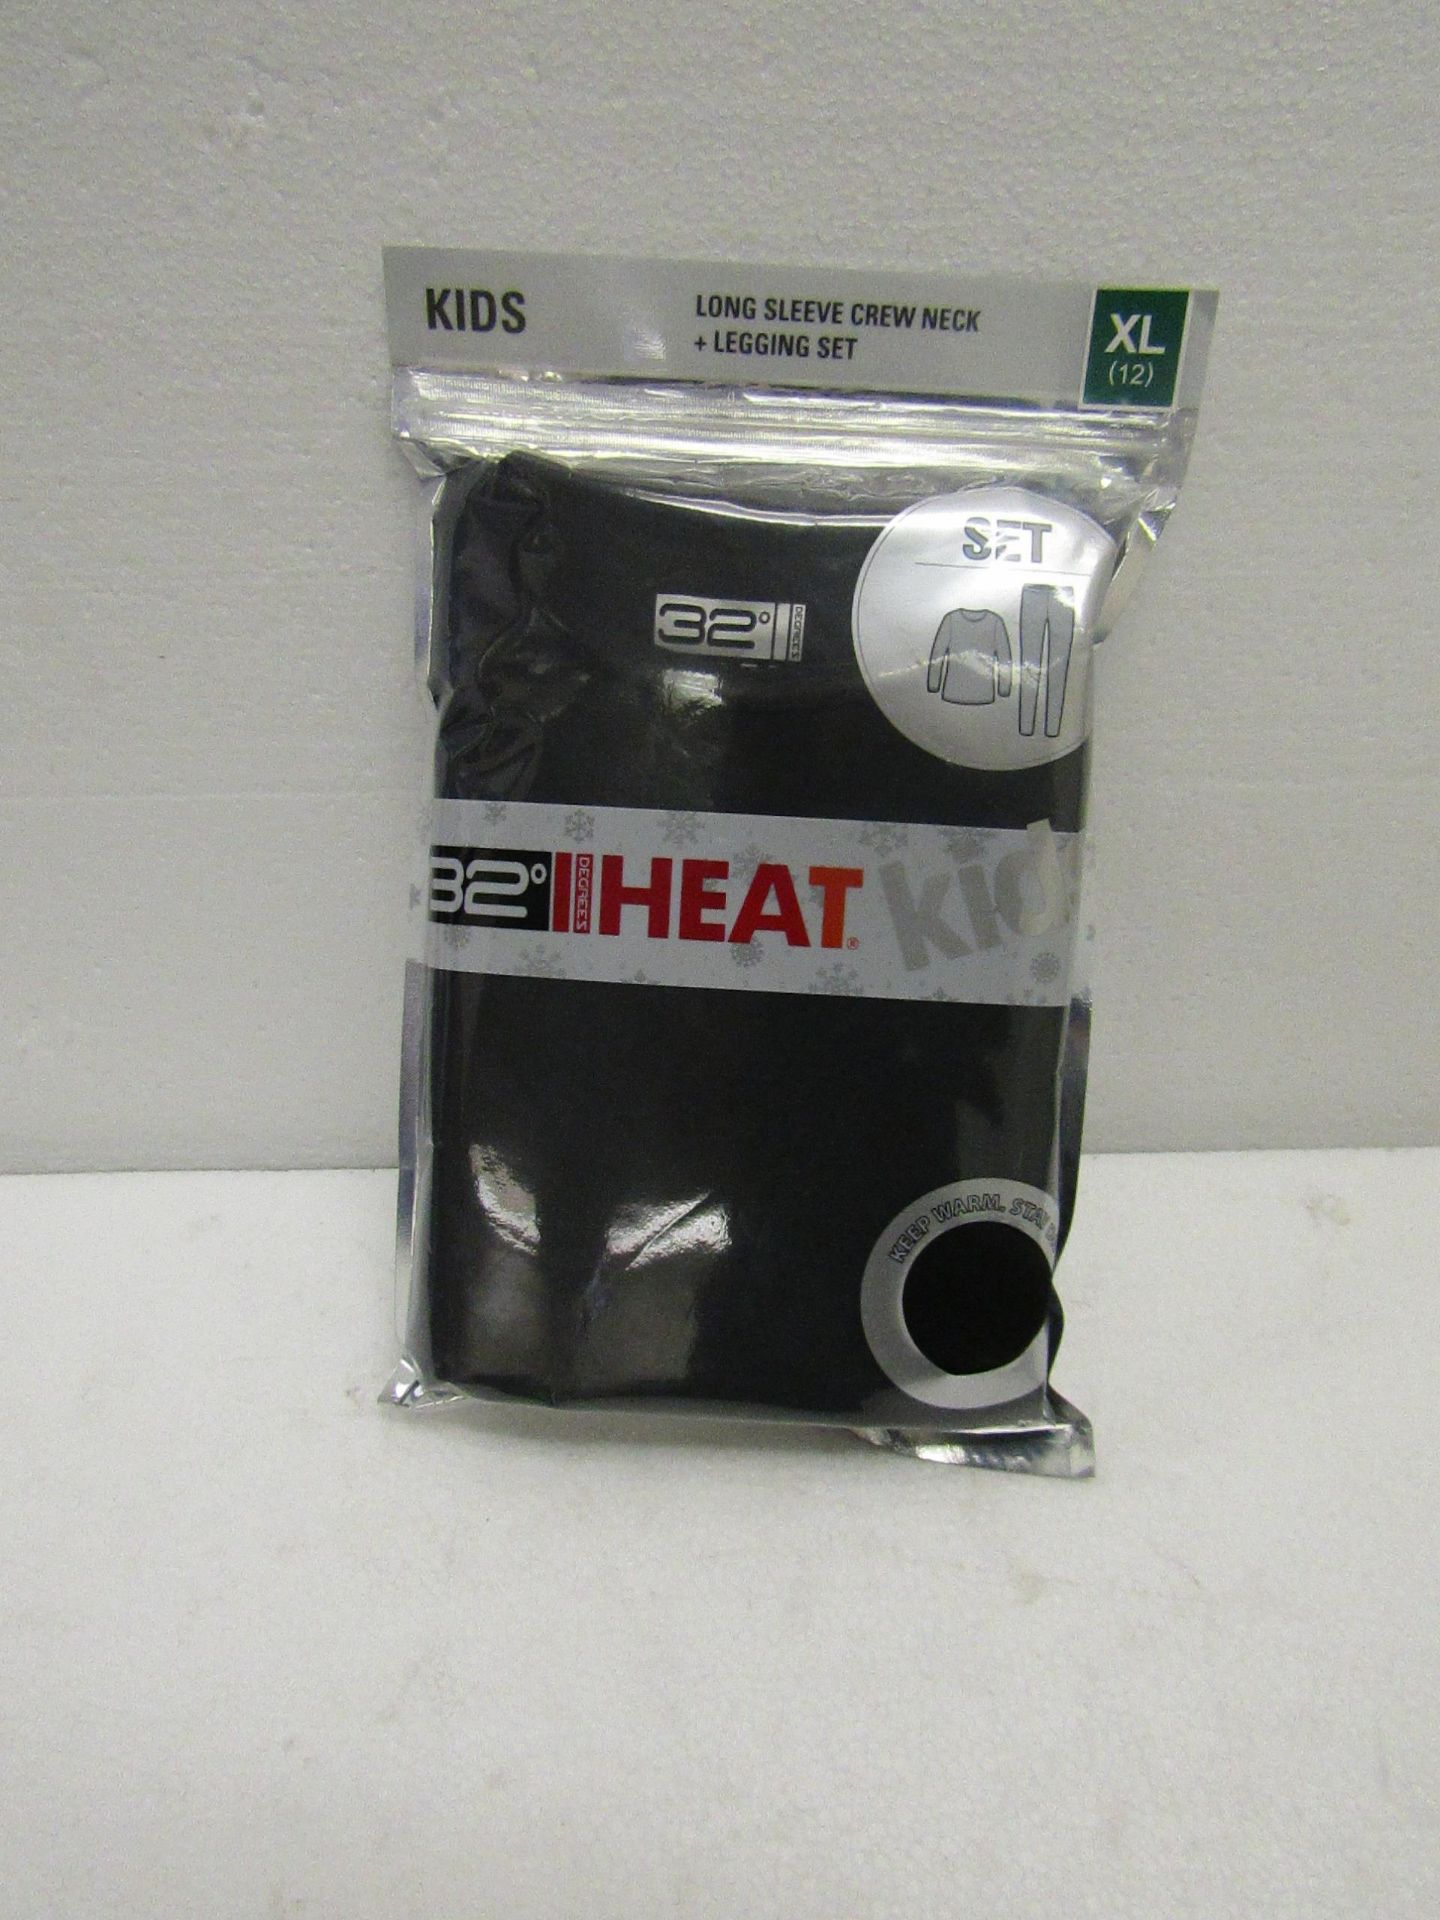 32 Degree Heat Kids Long Sleeve crew neck and leggings sets, new and packaged ready for the Cold